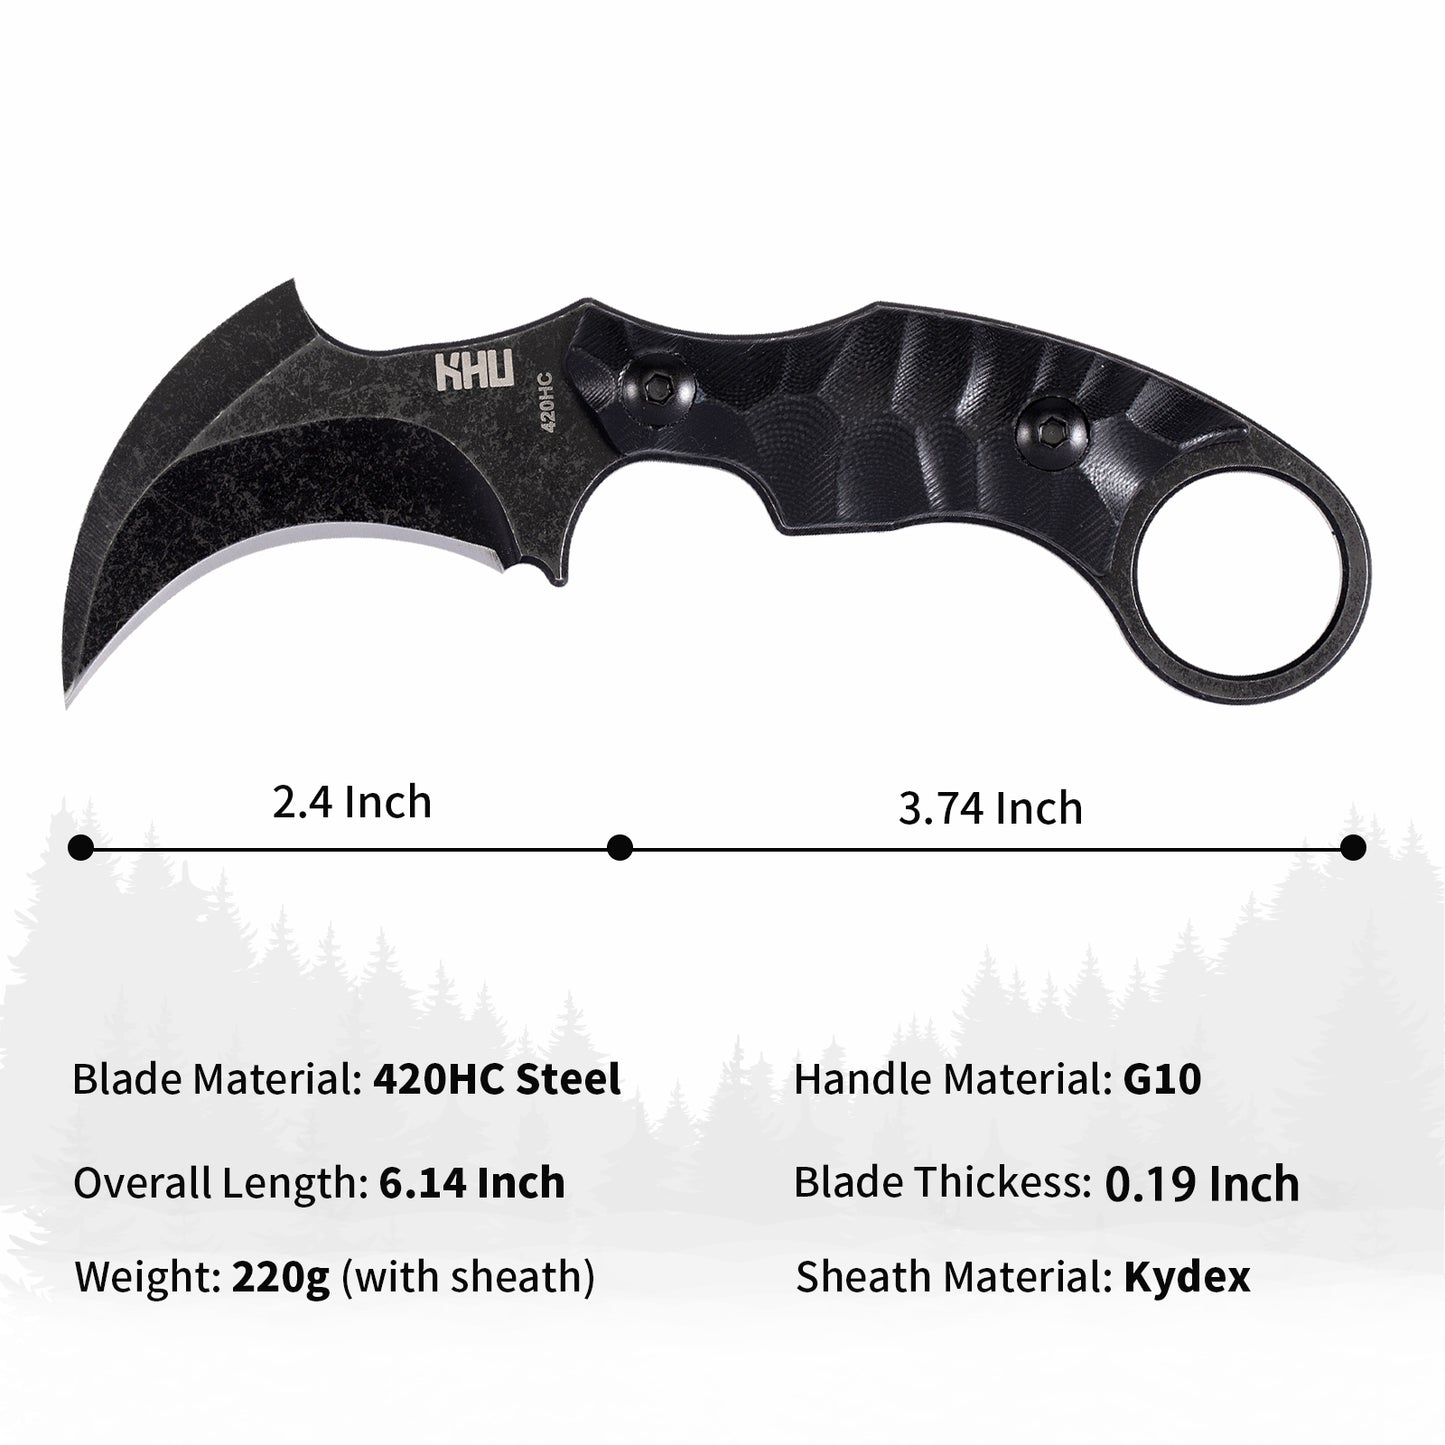 KHU Fixed Blade Knife Tactical, karambit knife Hunting Knife Claw Knife Survival Knife 420HC Steel G10 Handle, Outdoor Hunting Camping Accessories Camping Gear With Kydex Sheath